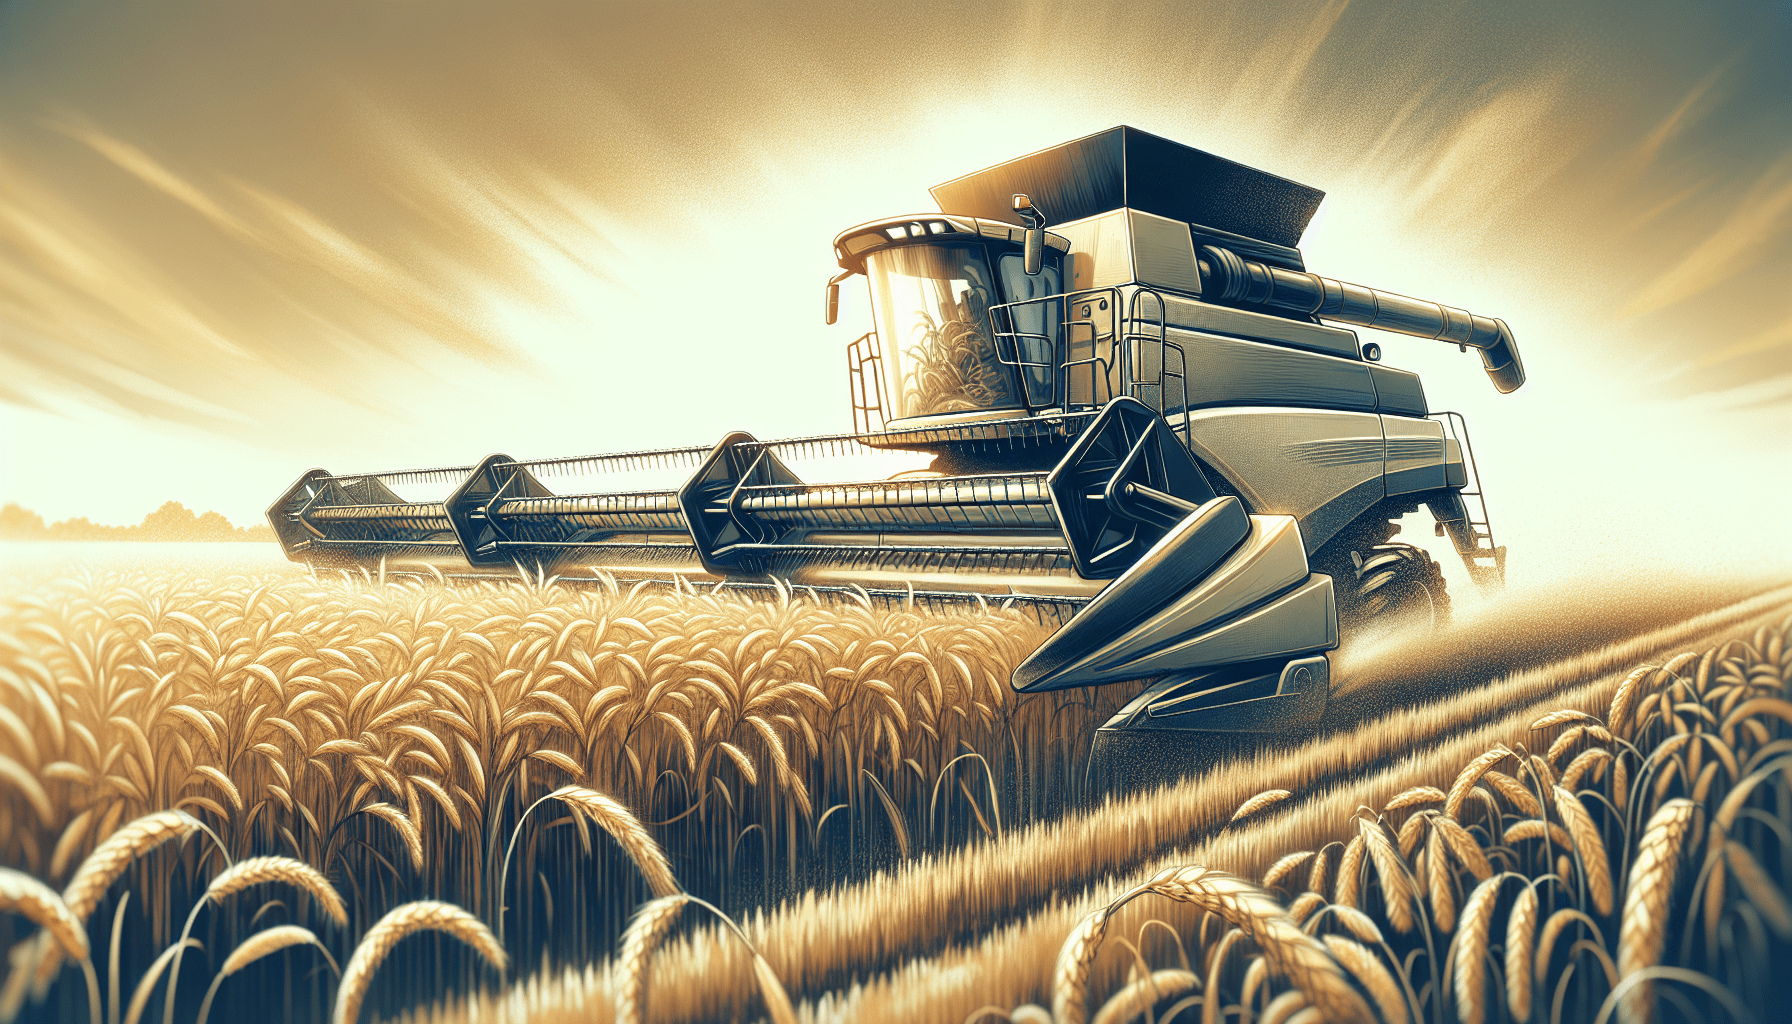 How To Effectively Use A Combine Harvester For Harvesting Crops